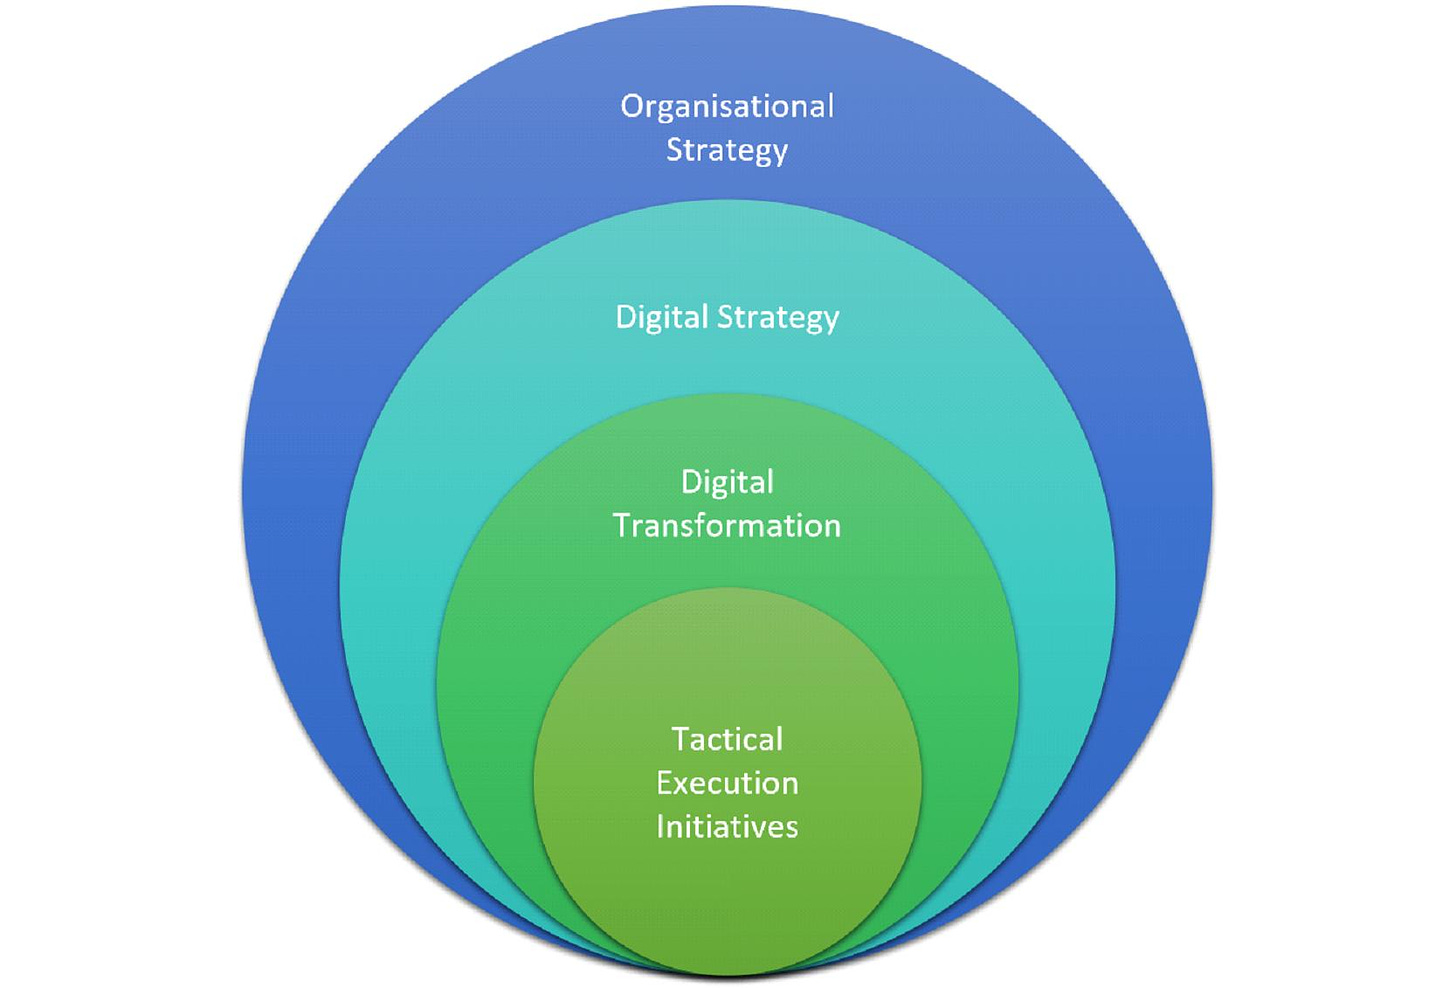 Hierarchy of moving from organisational strategy through to tactical execution initiatives